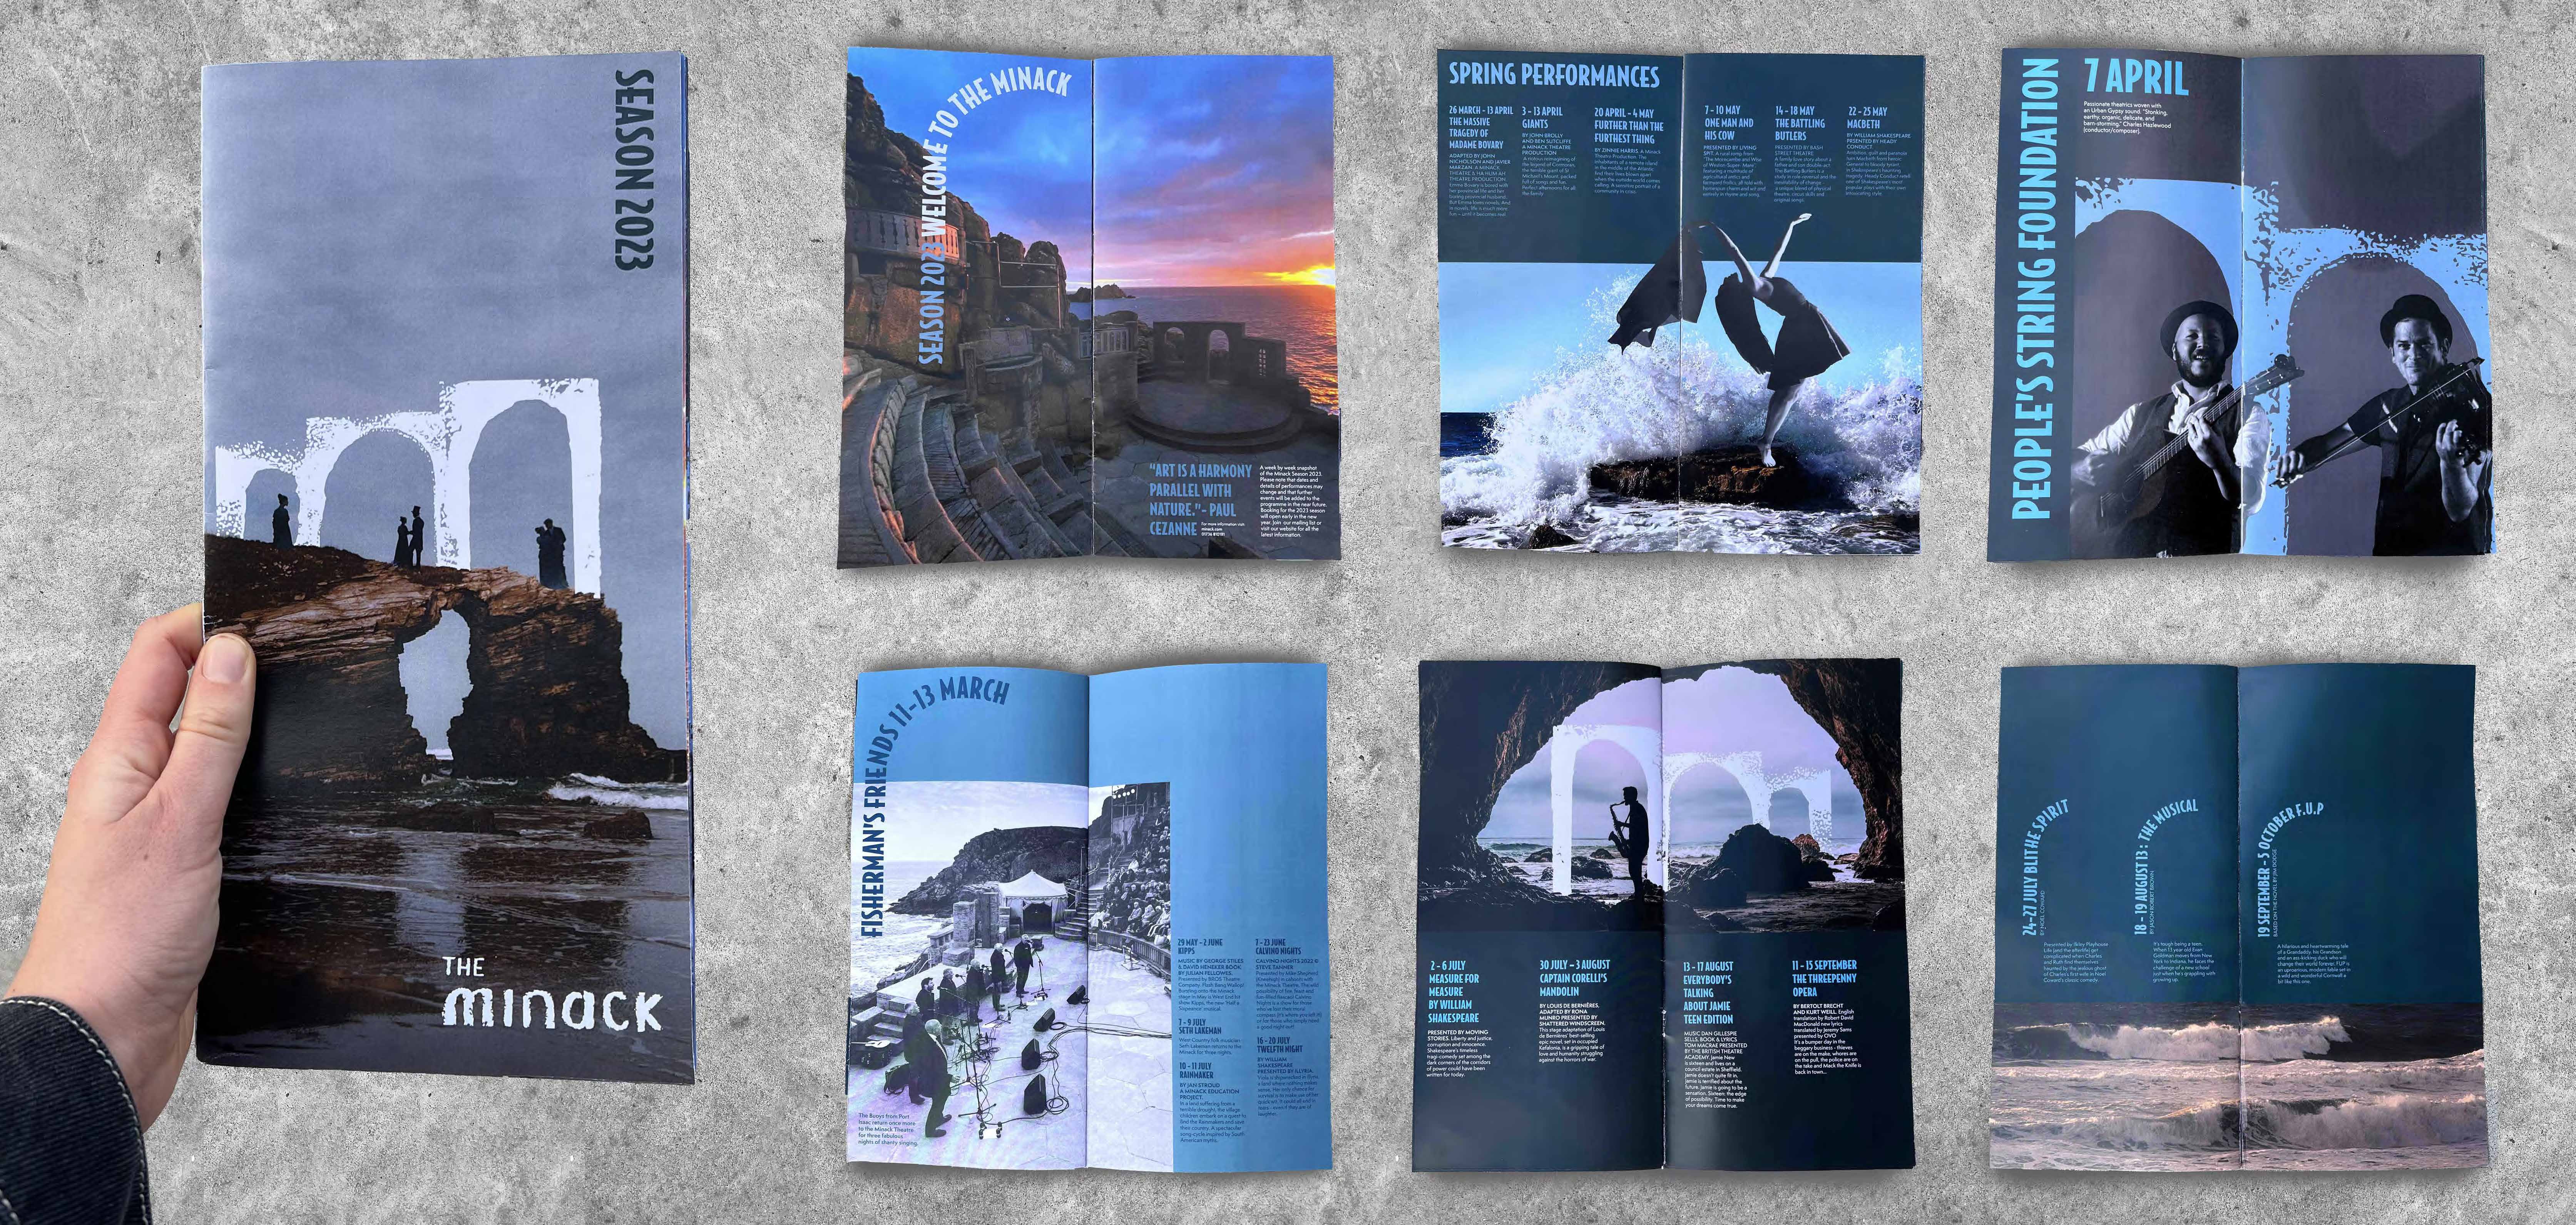 Theatre programme utilising the logo arches with text and images of the Cornish coast. By Emily Blaxill.